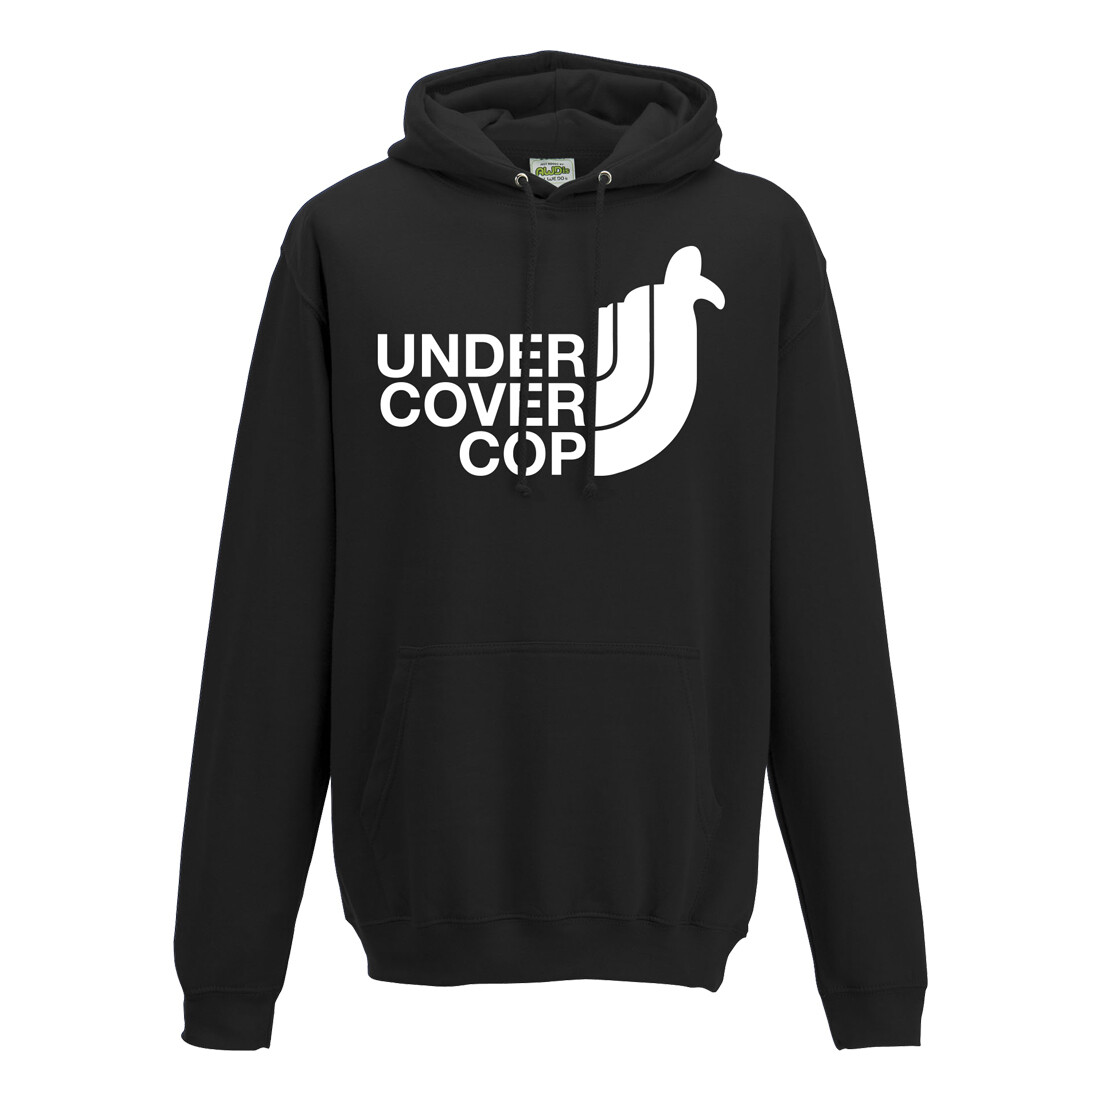 Unisex Under Cover Cop Hooded Top